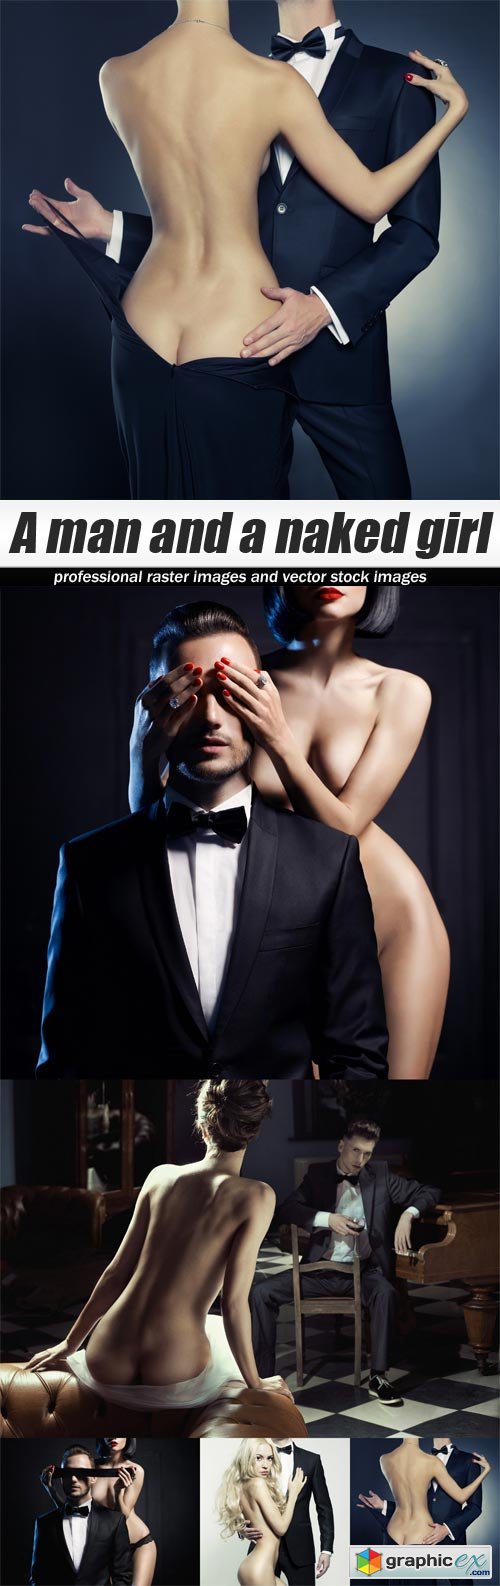 A man and a naked girl